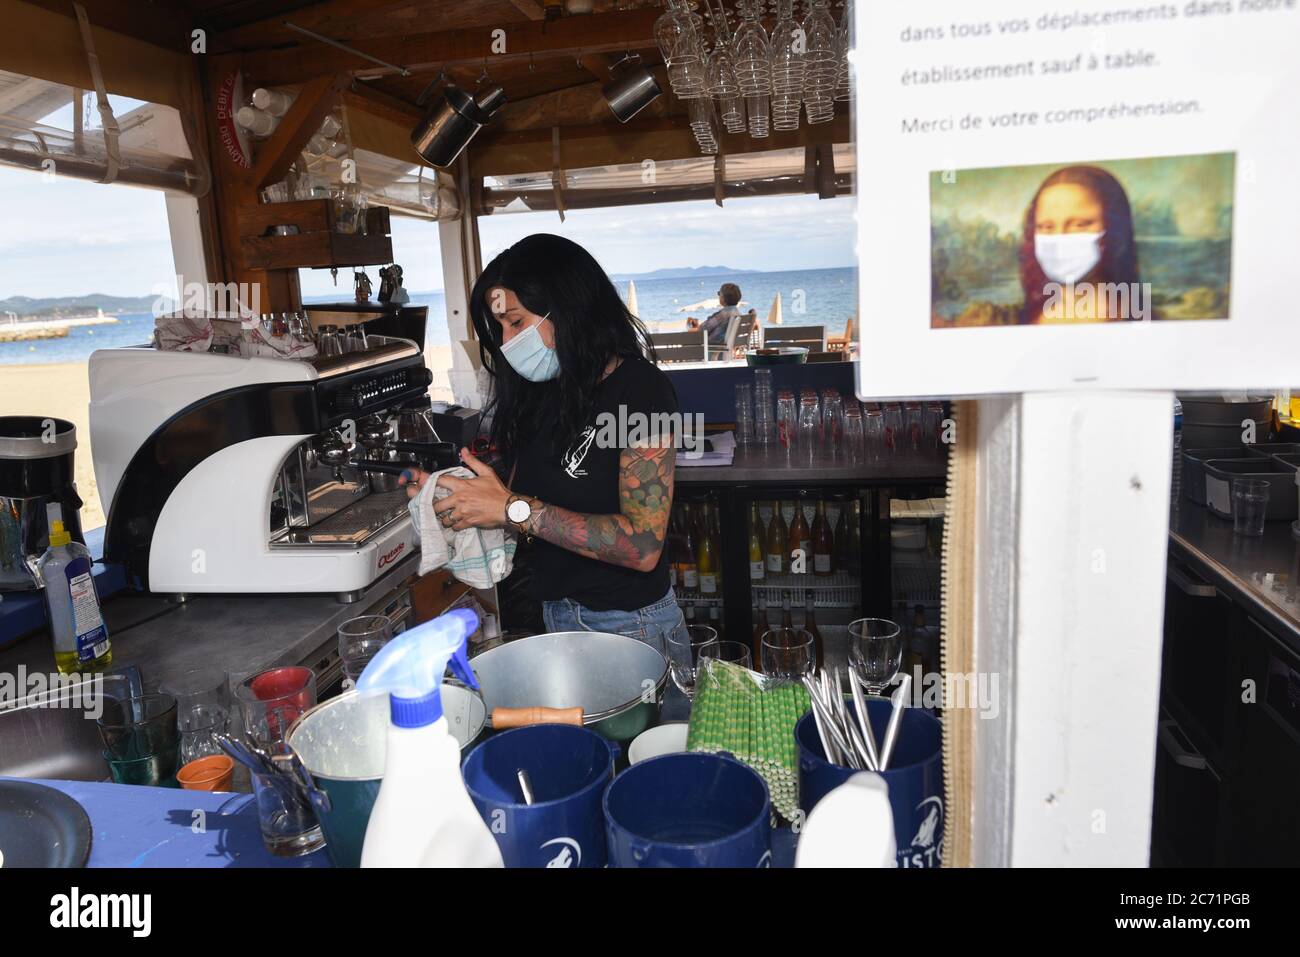 STRICTLY NO SALES TO FRENCH MEDIA OR PUBLISHERS - RIGHTS RESERVED ***June  07, 2020 - La-Londe-les-Maures, France: Alyzee, a waitress at La Voile  Plage, cleans glasses at the beach restaurant La